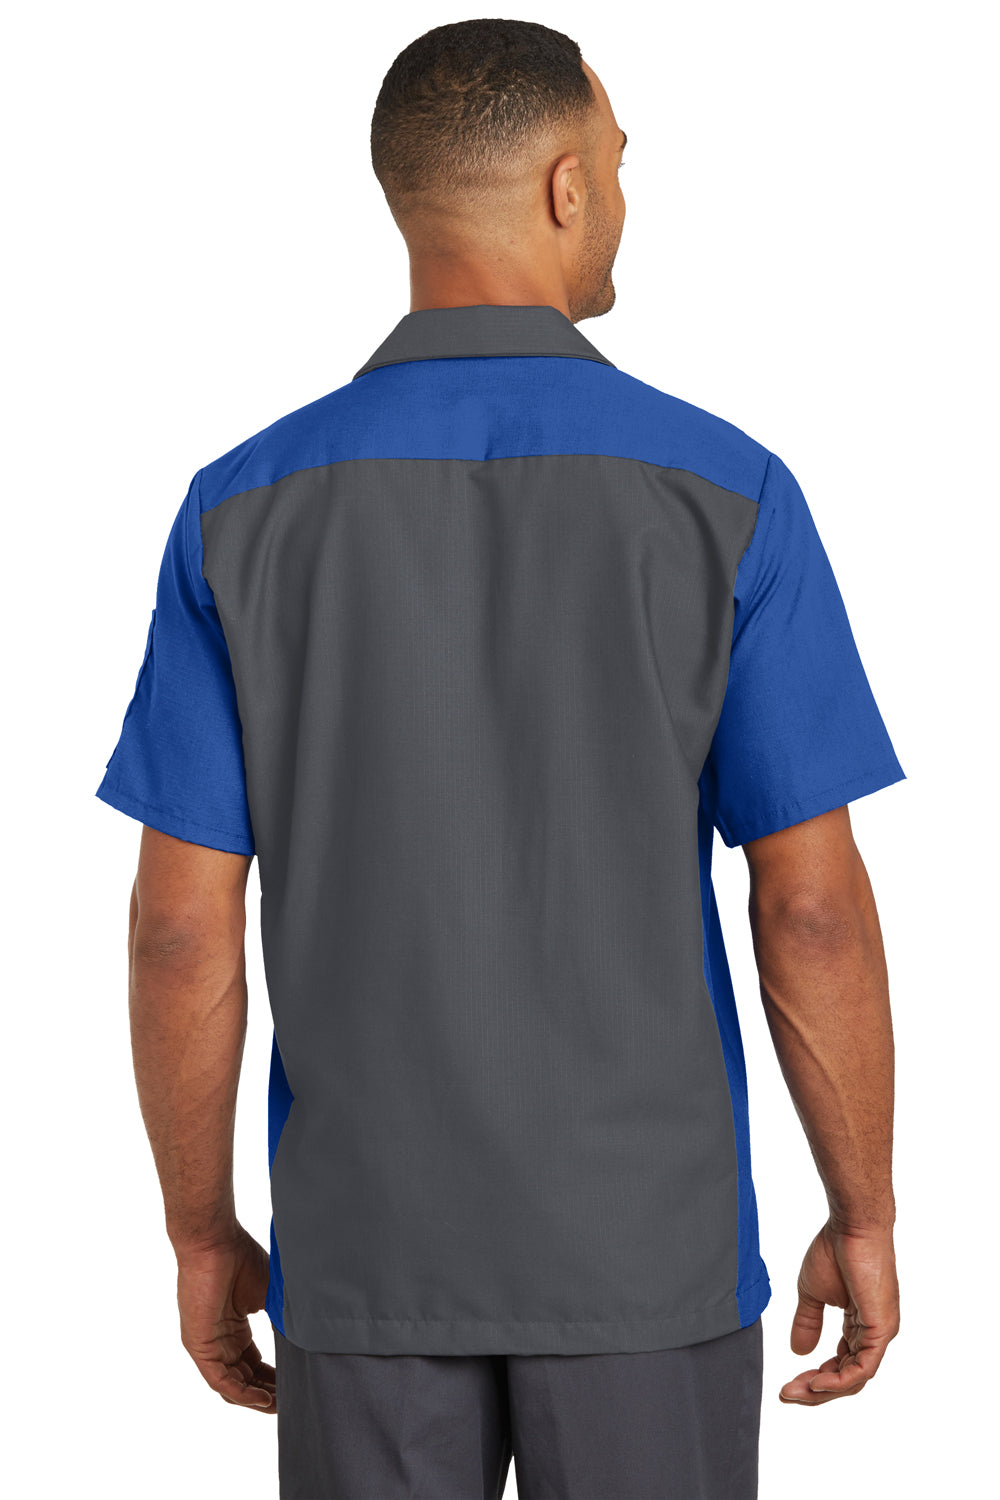 Red Kap SY20 Mens Crew Moisture Wicking Short Sleeve Button Down Shirt w/ Double Pockets Charcoal Grey/Royal Blue Back